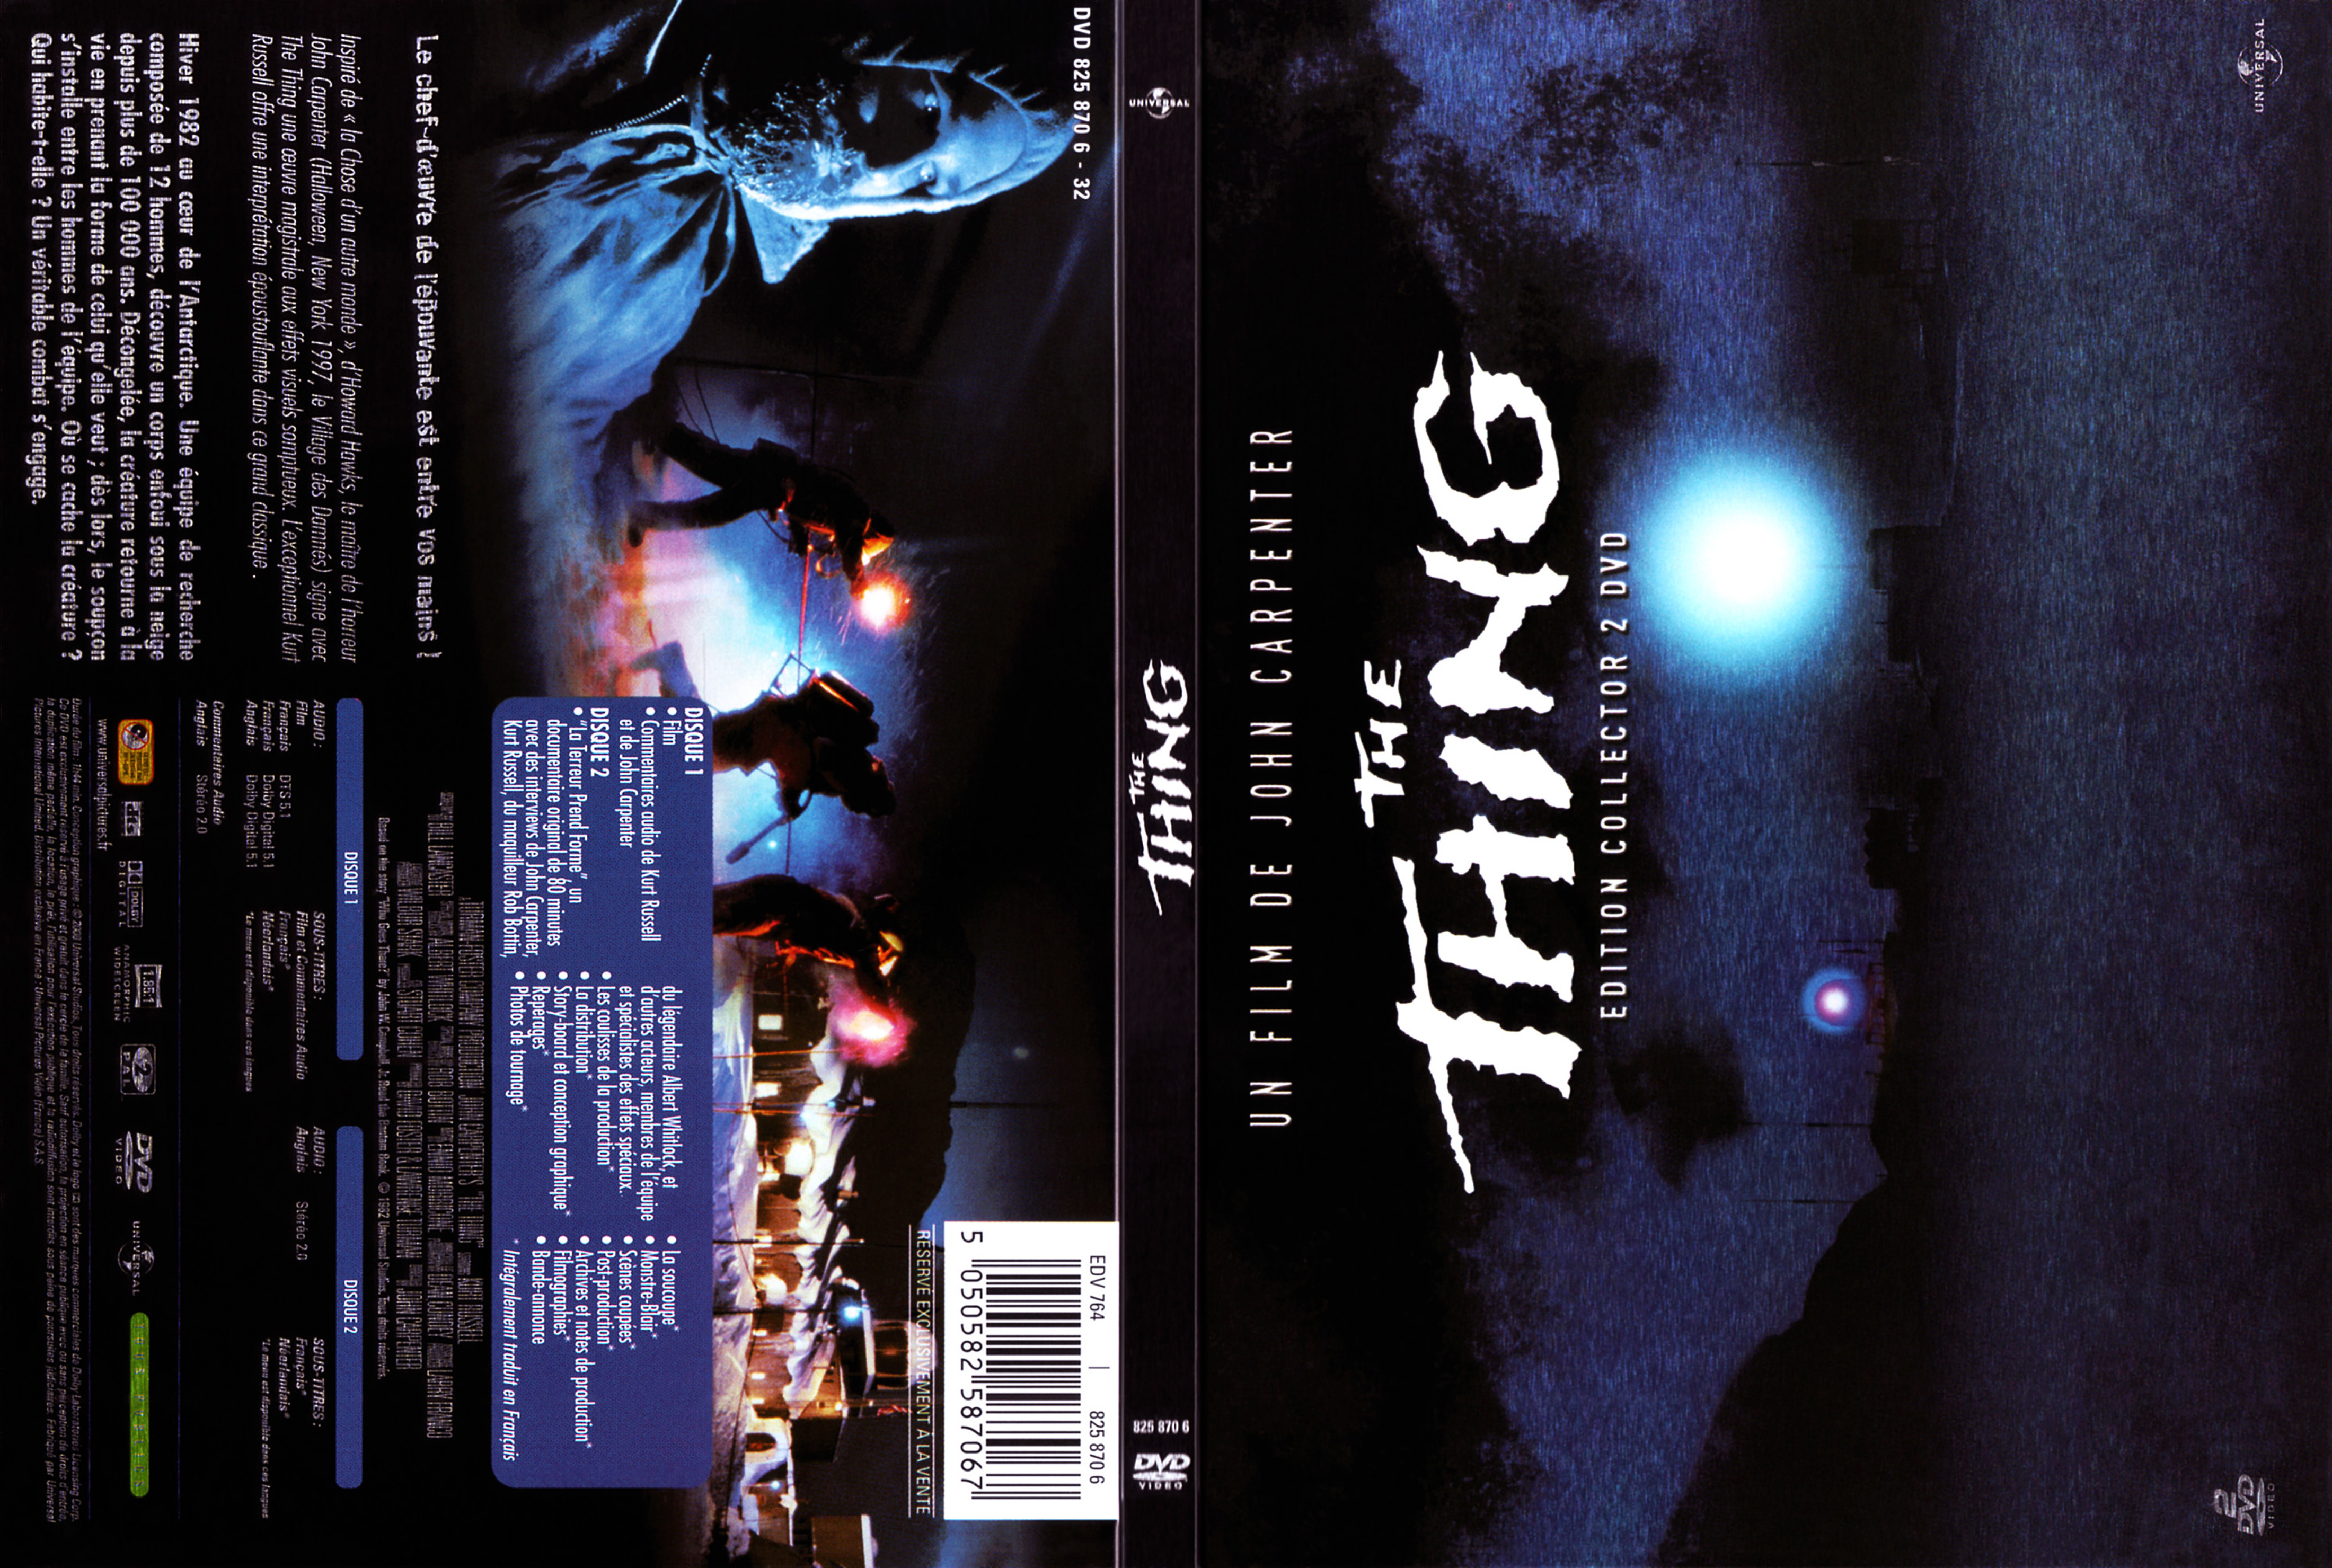 Jaquette DVD The thing v4